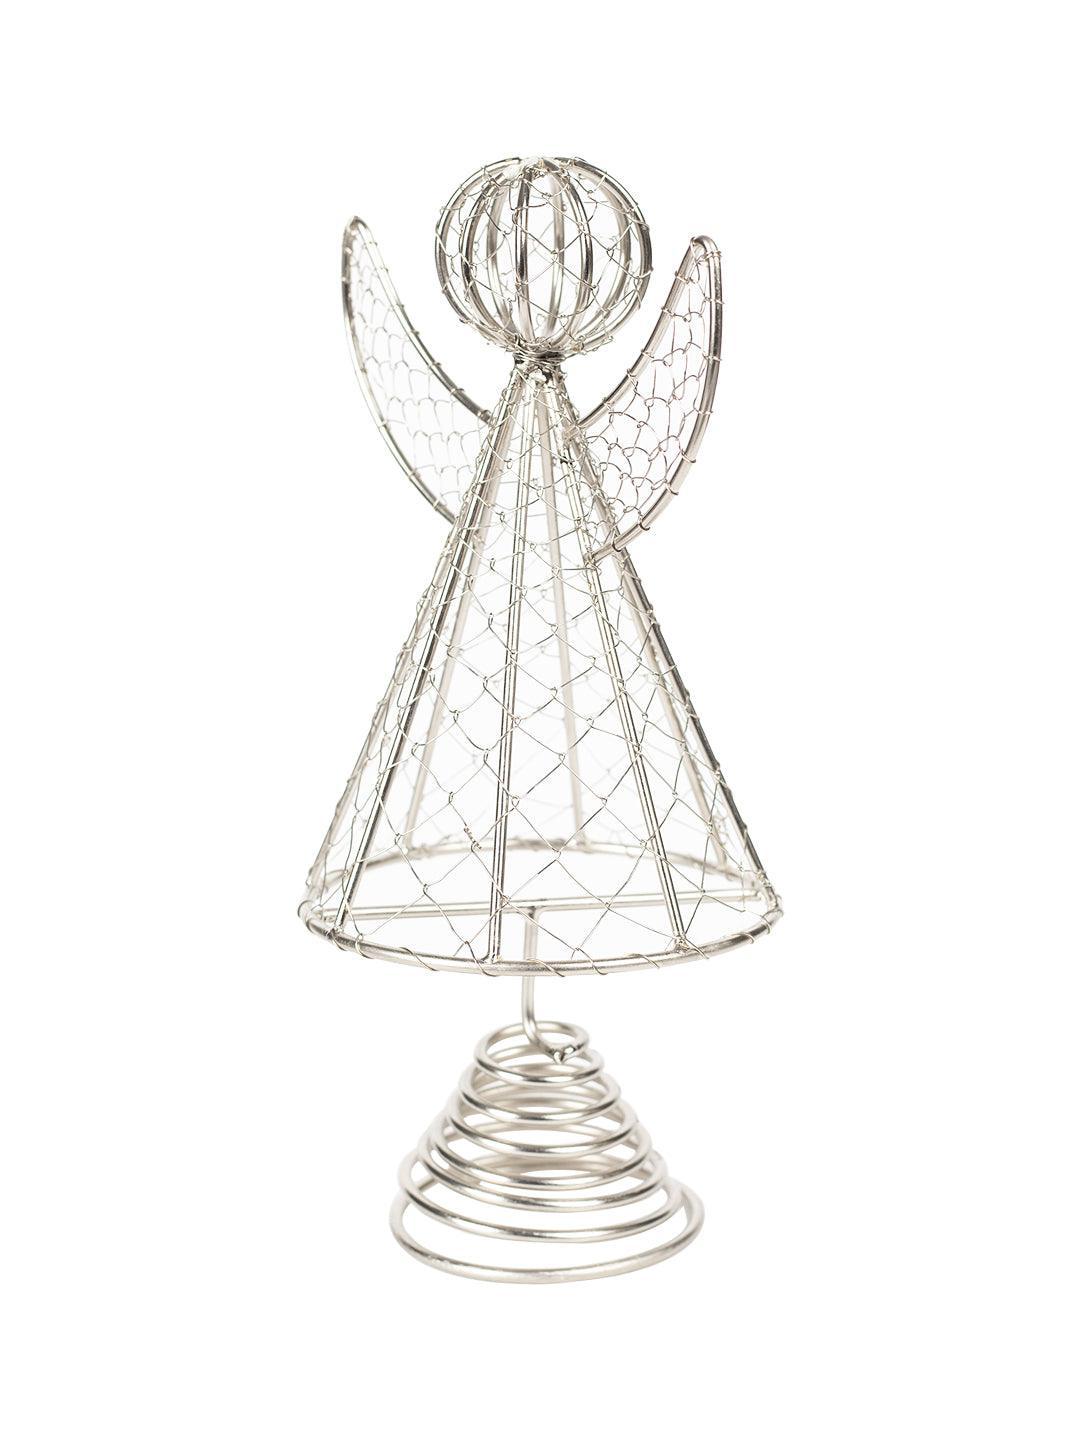 Silver Metal Christmas Angle Tree Topper Decoration Ornament - MARKET 99